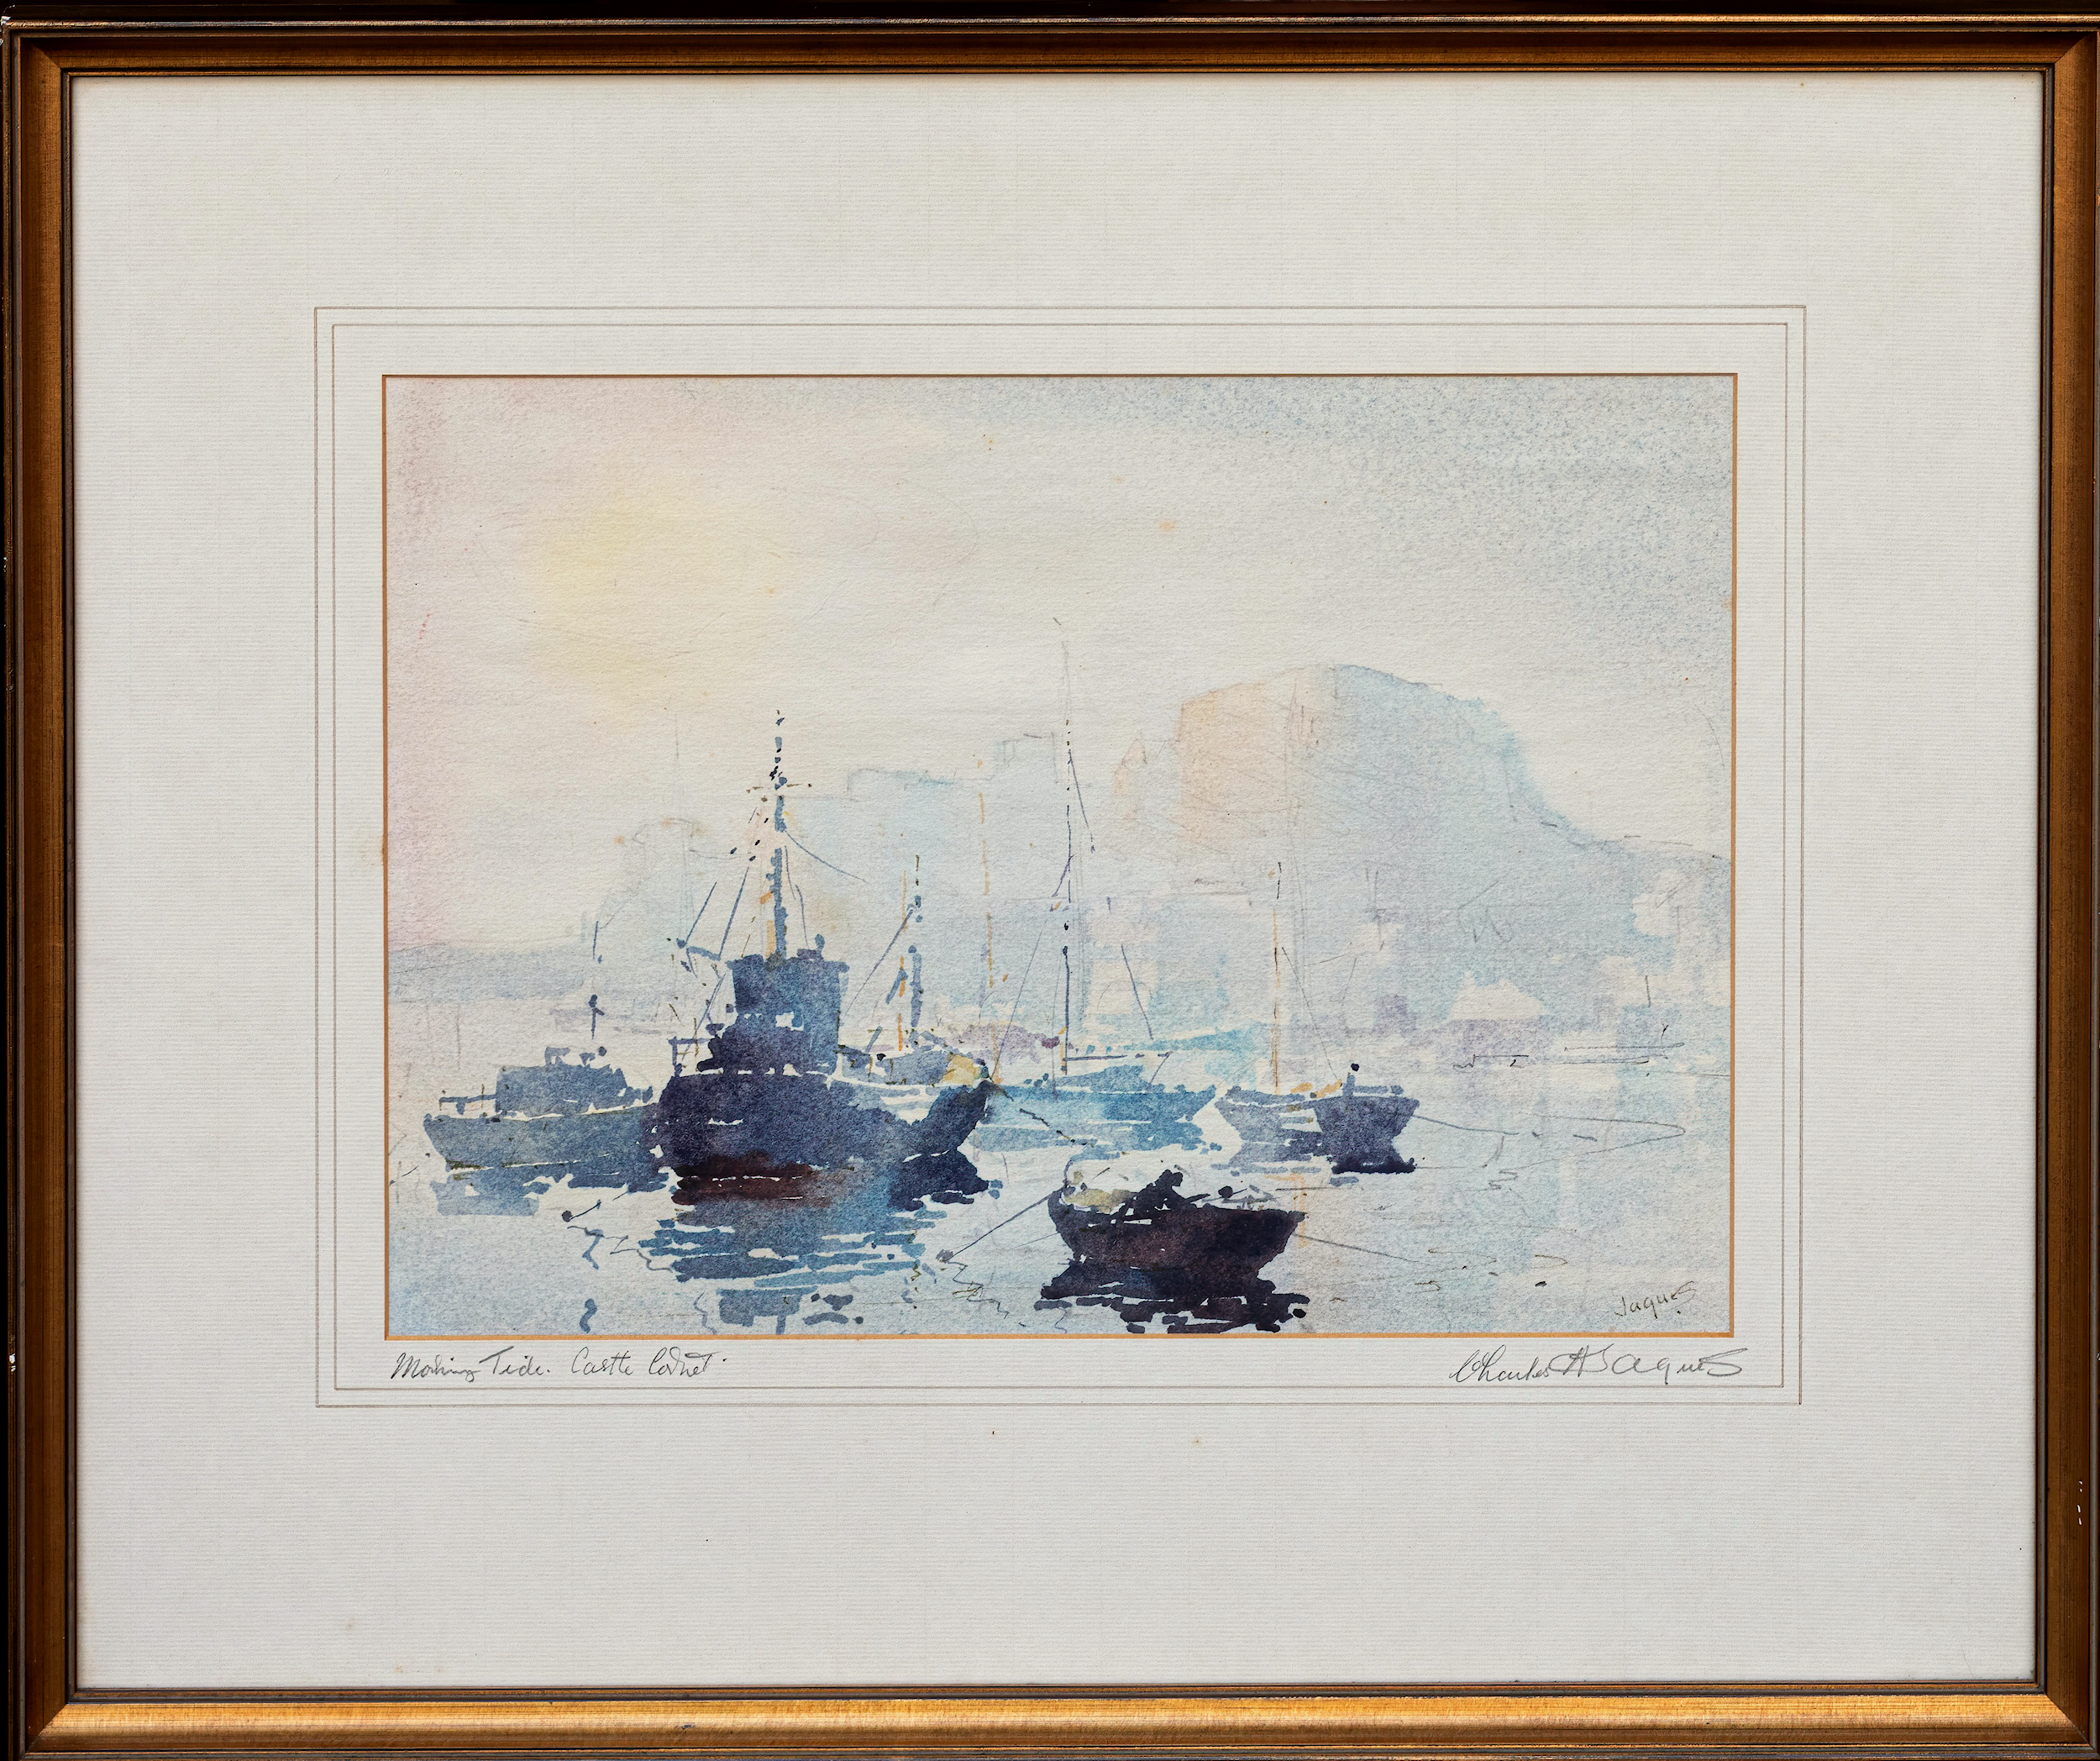 Charles Jaques (1921-2008), "Morning Tide, Castle Cornet" Guernsey . watercolour, signed lower right - Image 2 of 2